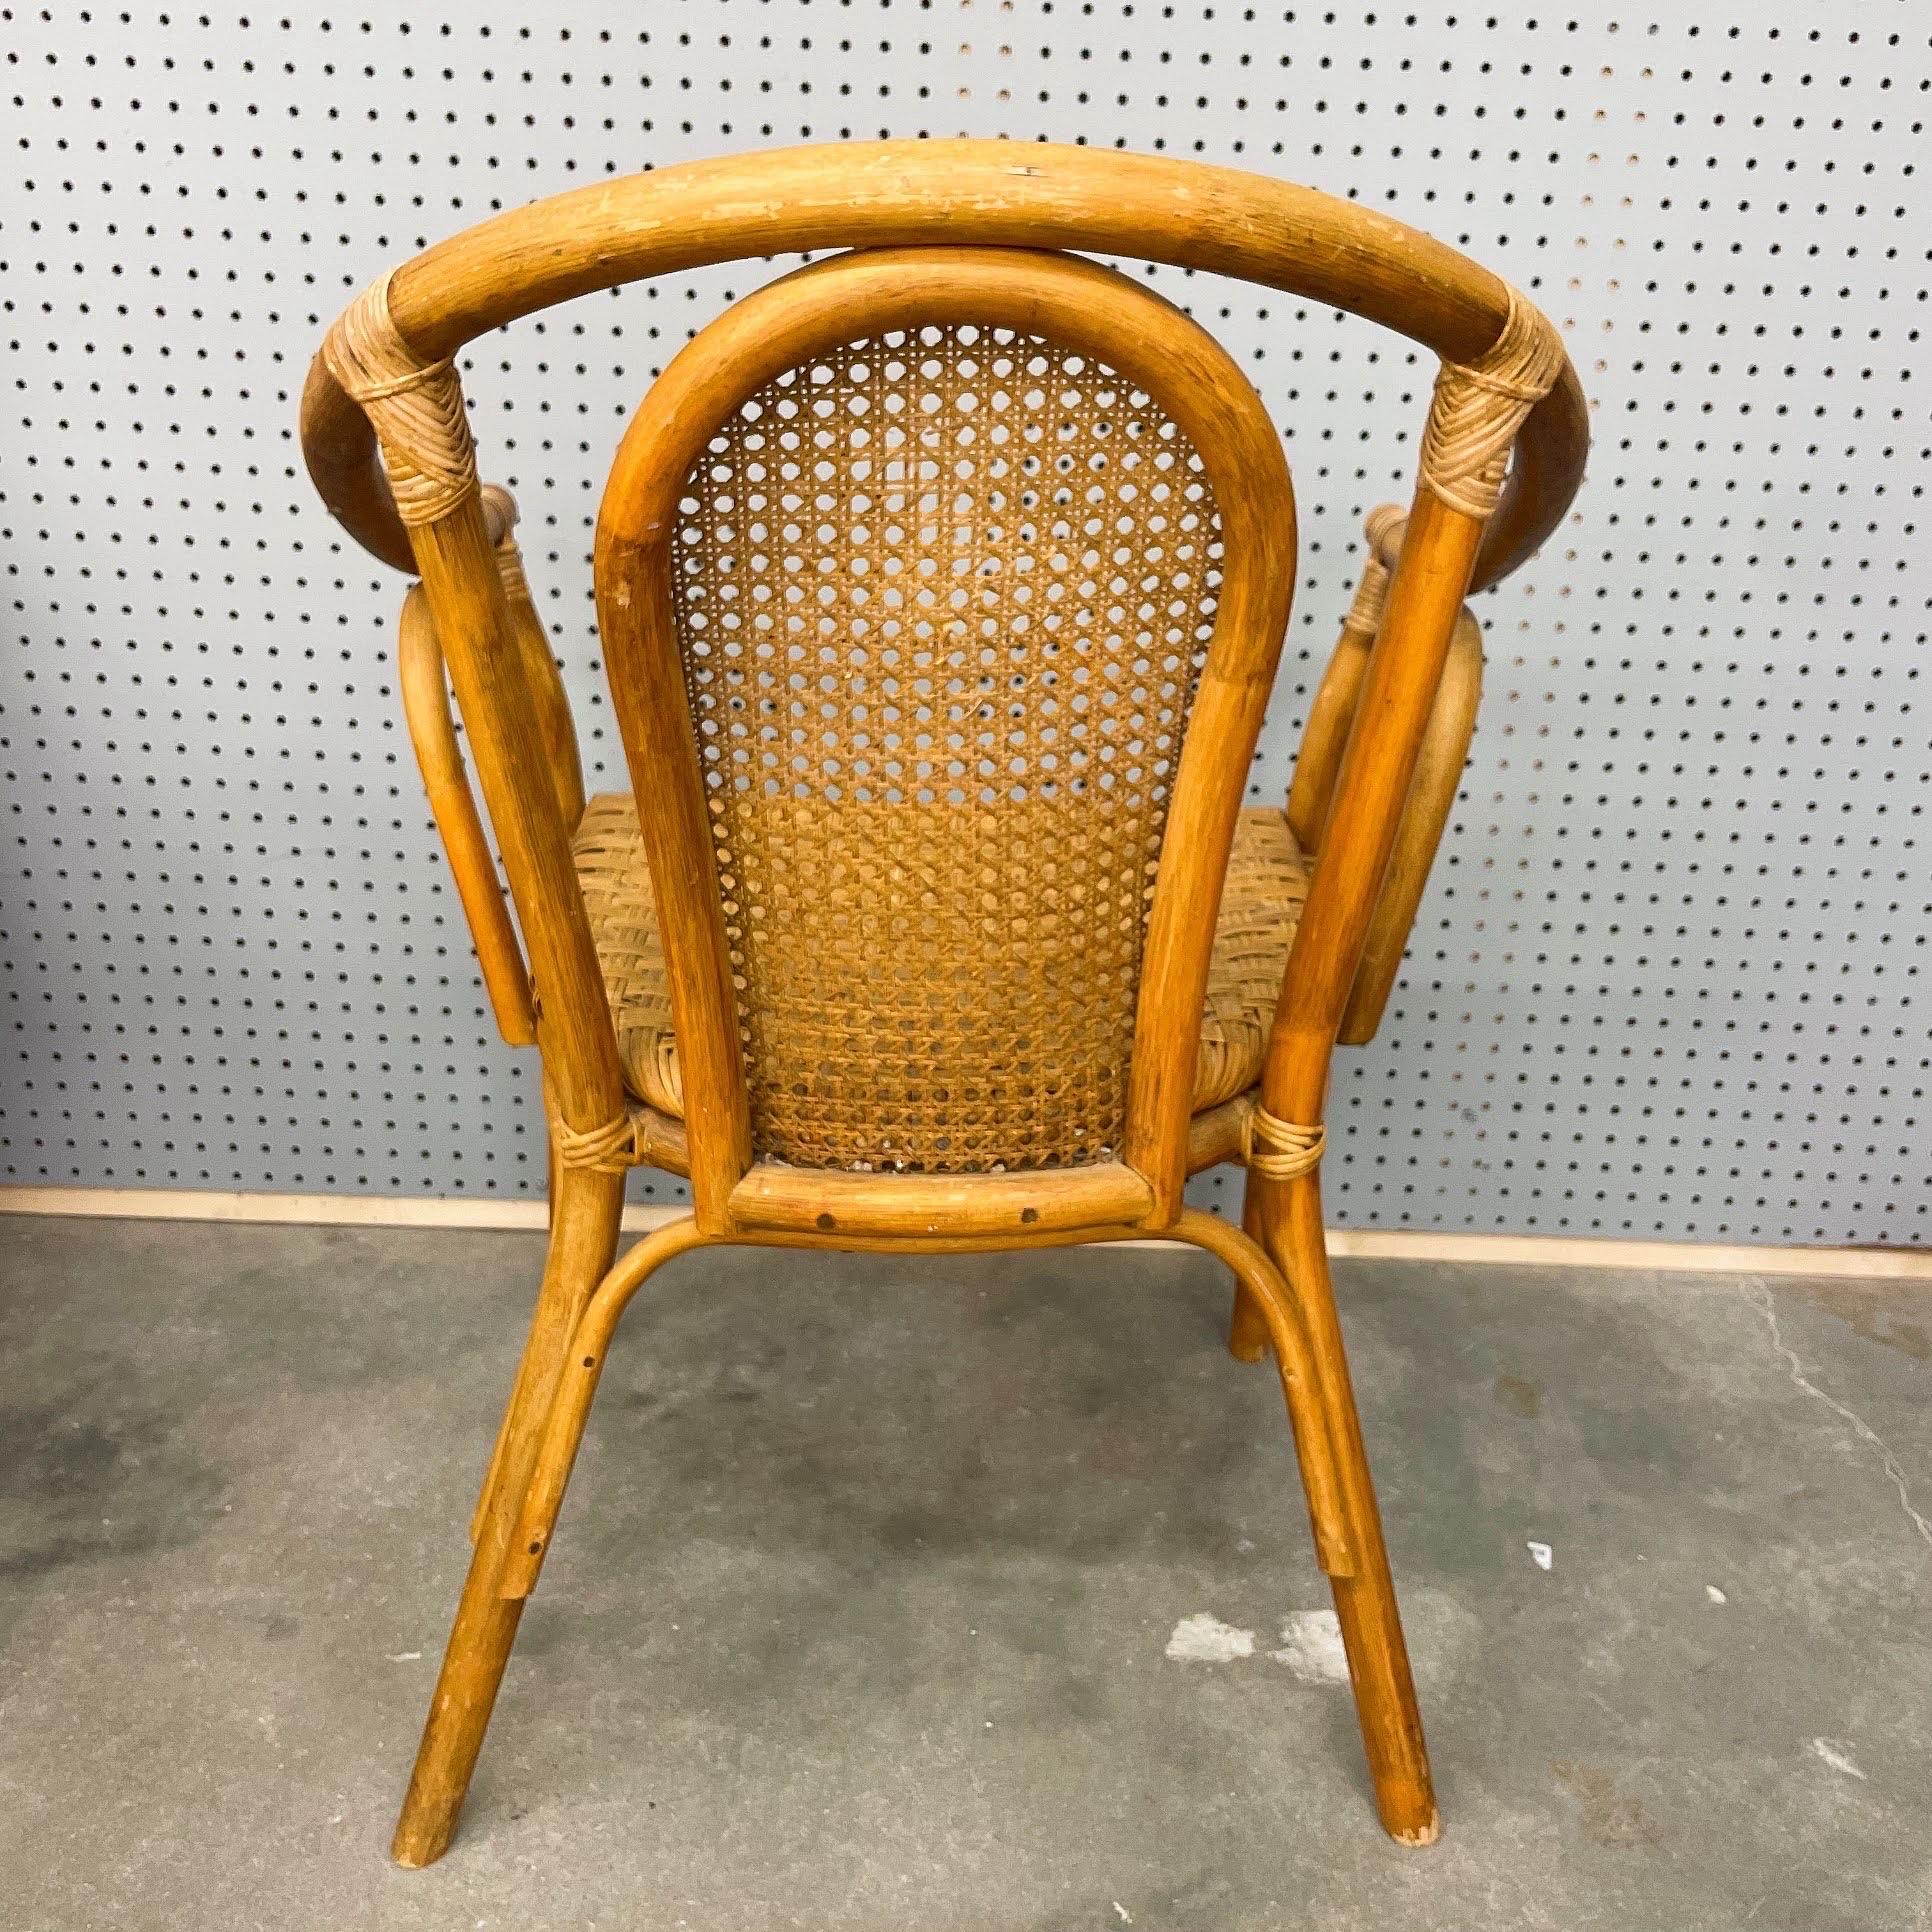 Mid 20th Century Bamboo Rattan Dining Chairs With Cane Inset Back - Set of 4 For Sale 3